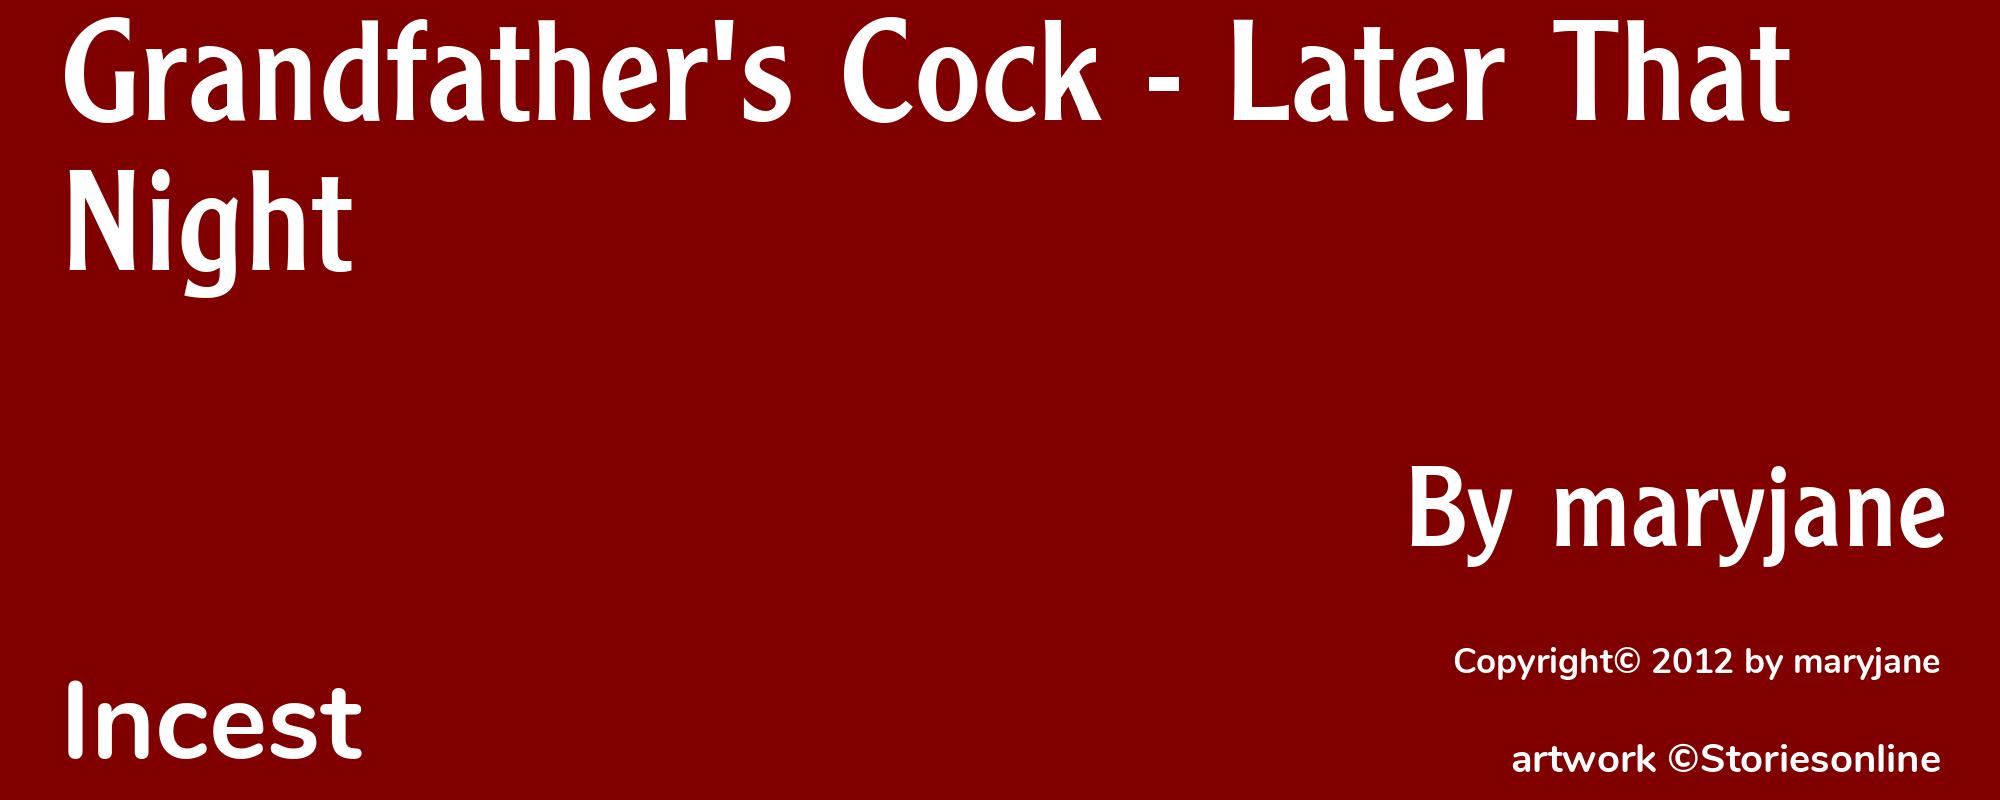 Grandfather's Cock - Later That Night - Cover